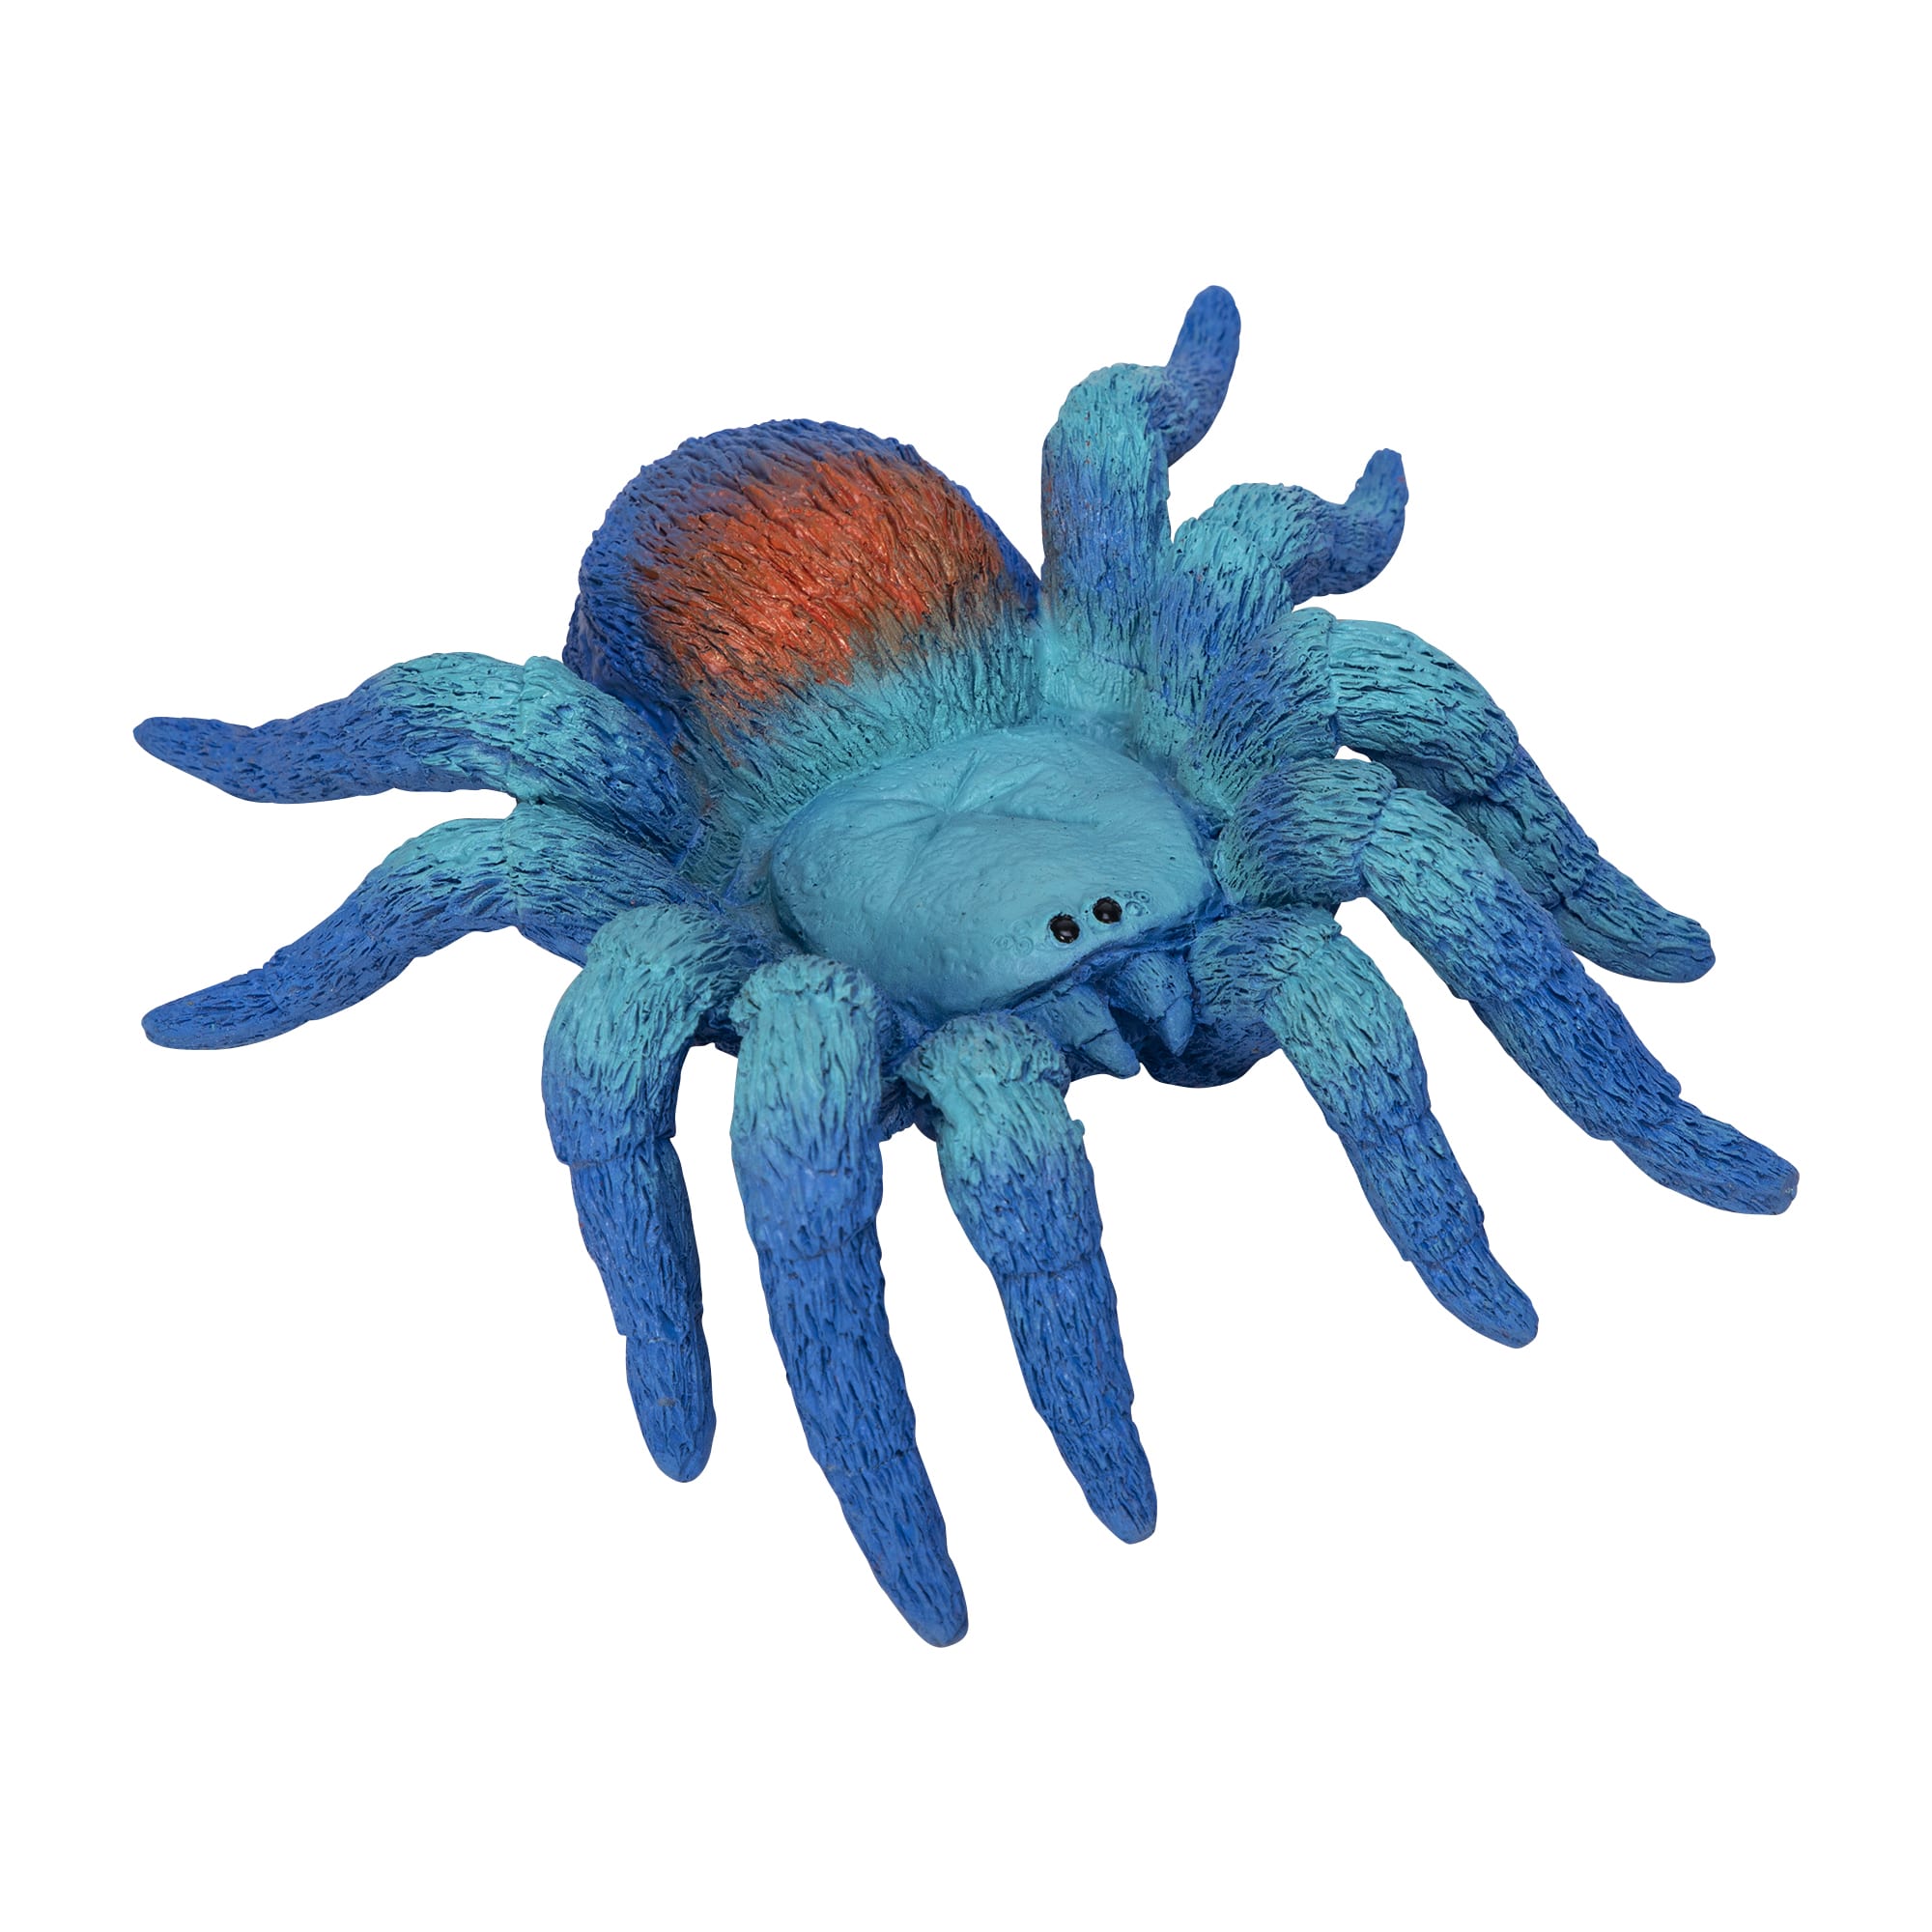 Spider Hand Puppet - (Single) Black, Blue, or Red    